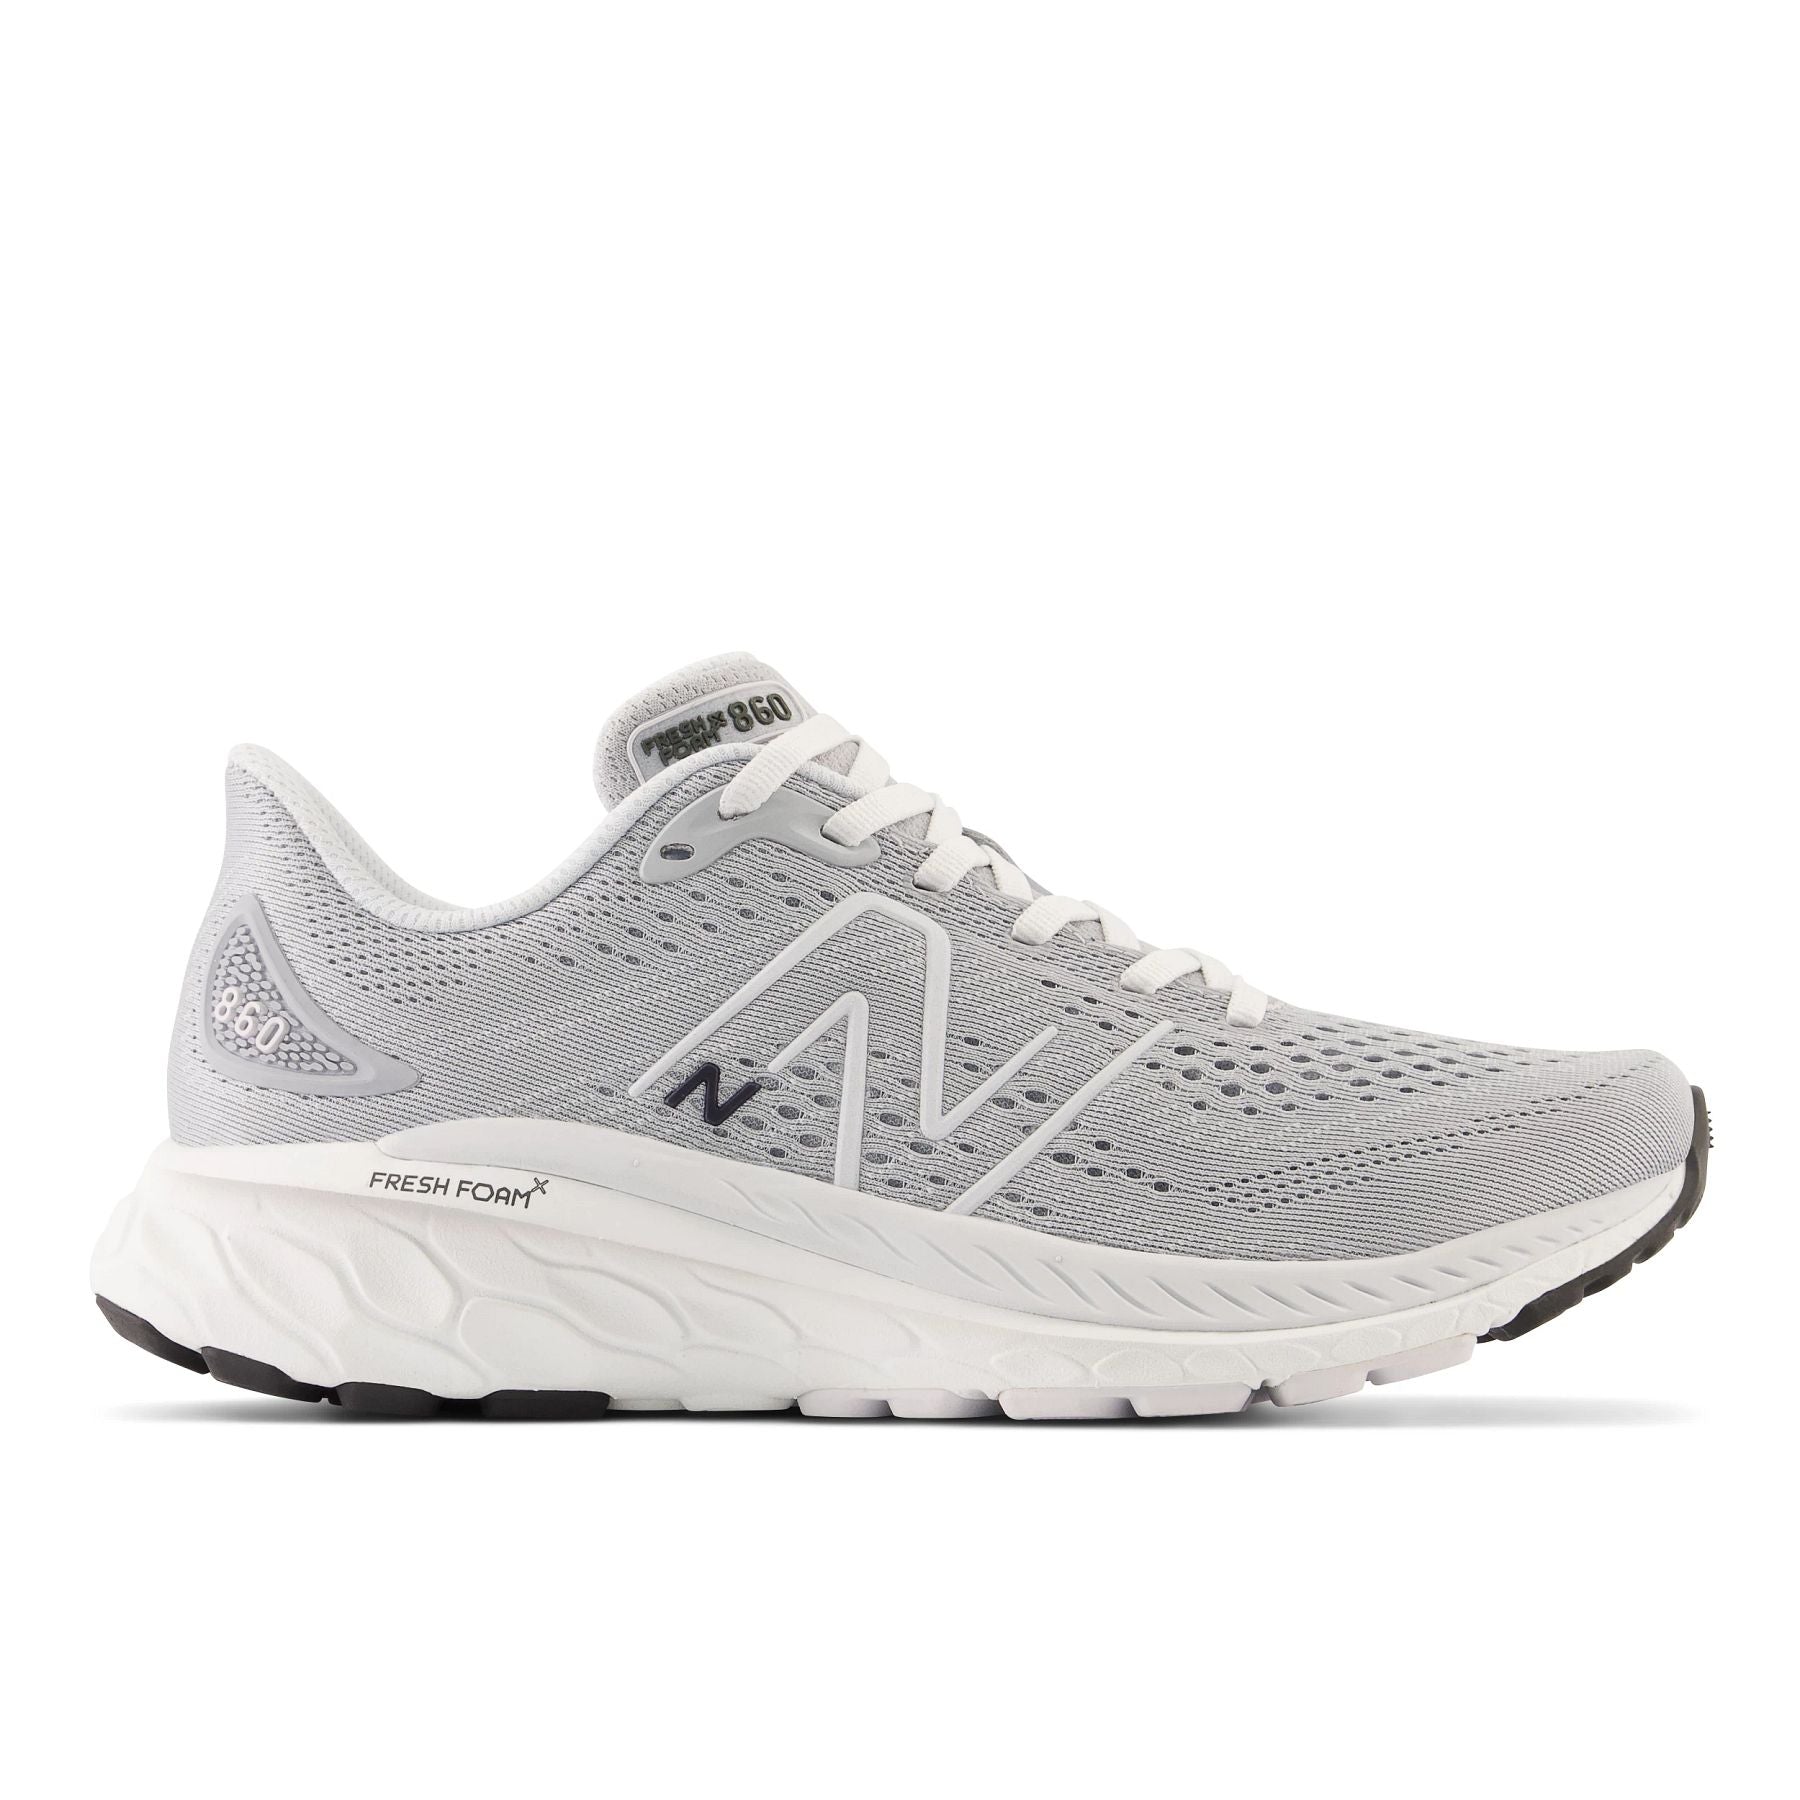 Lateral view of the Women's New Balance 860 V13 in the color Aluminum